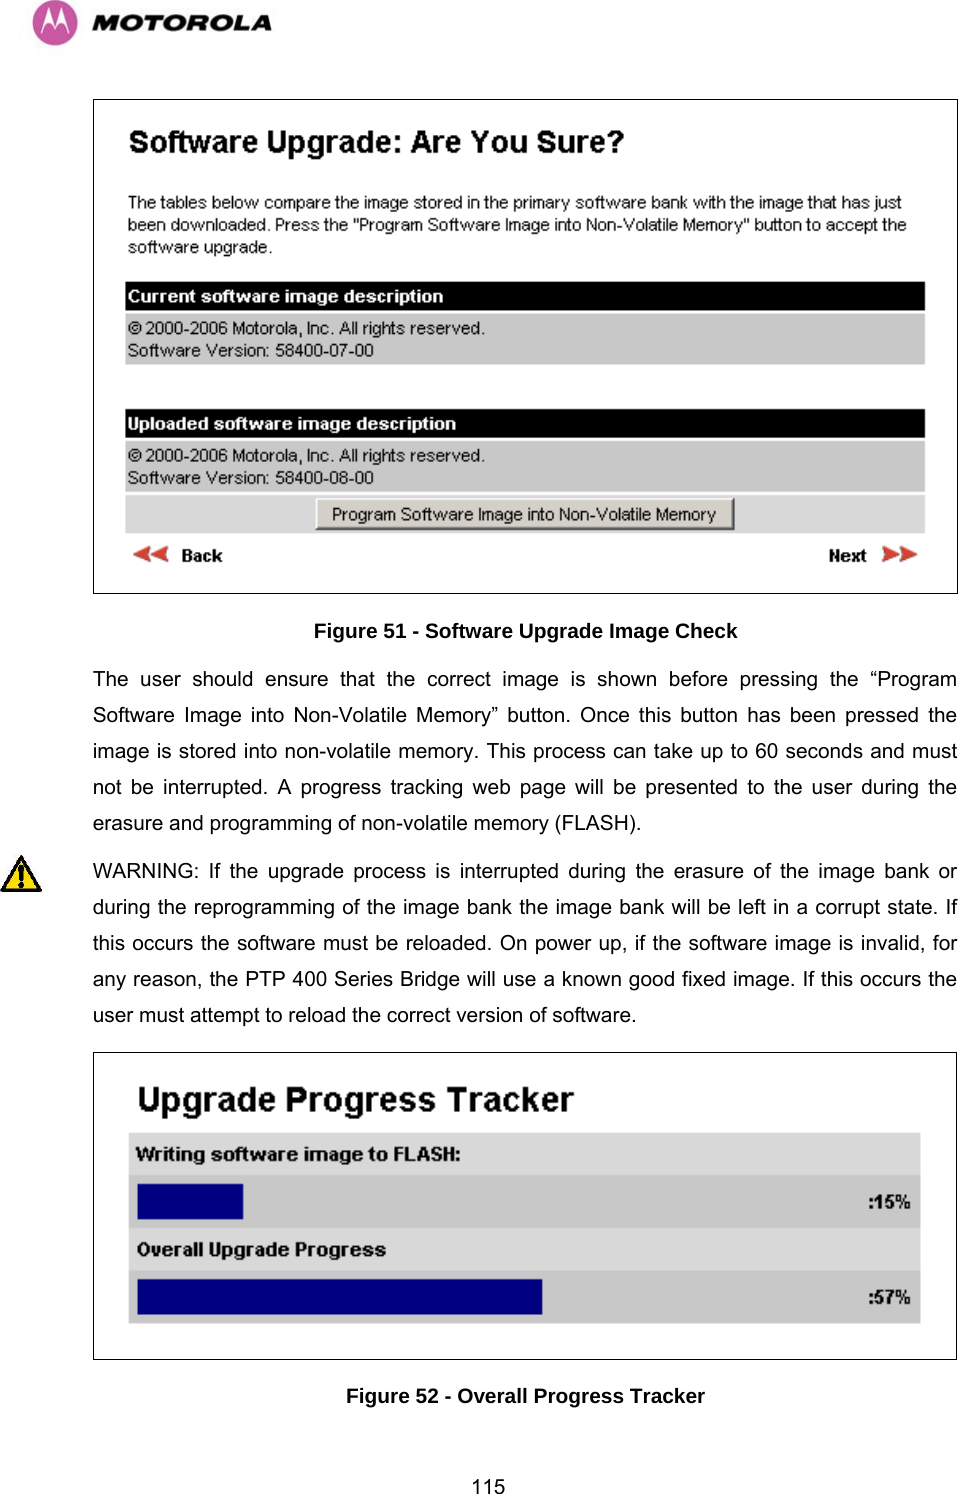   115 Figure 51 - Software Upgrade Image Check The user should ensure that the correct image is shown before pressing the “Program Software Image into Non-Volatile Memory” button. Once this button has been pressed the image is stored into non-volatile memory. This process can take up to 60 seconds and must not be interrupted. A progress tracking web page will be presented to the user during the erasure and programming of non-volatile memory (FLASH). WARNING: If the upgrade process is interrupted during the erasure of the image bank or during the reprogramming of the image bank the image bank will be left in a corrupt state. If this occurs the software must be reloaded. On power up, if the software image is invalid, for any reason, the PTP 400 Series Bridge will use a known good fixed image. If this occurs the user must attempt to reload the correct version of software.  Figure 52 - Overall Progress Tracker 